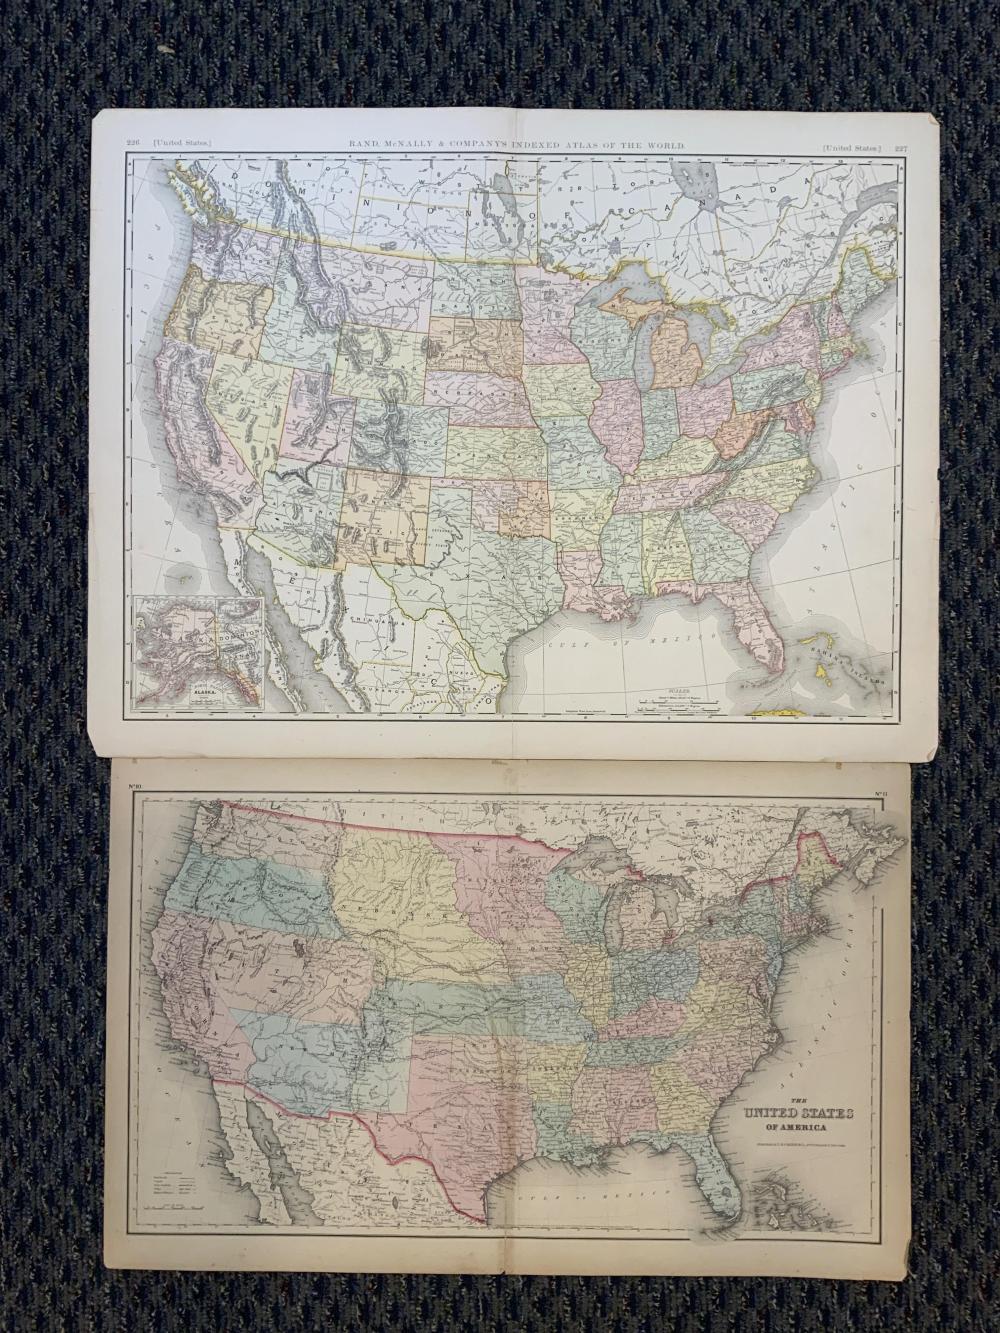 TWO UNFRAMED MAPS OF THE UNITED 32ec6a